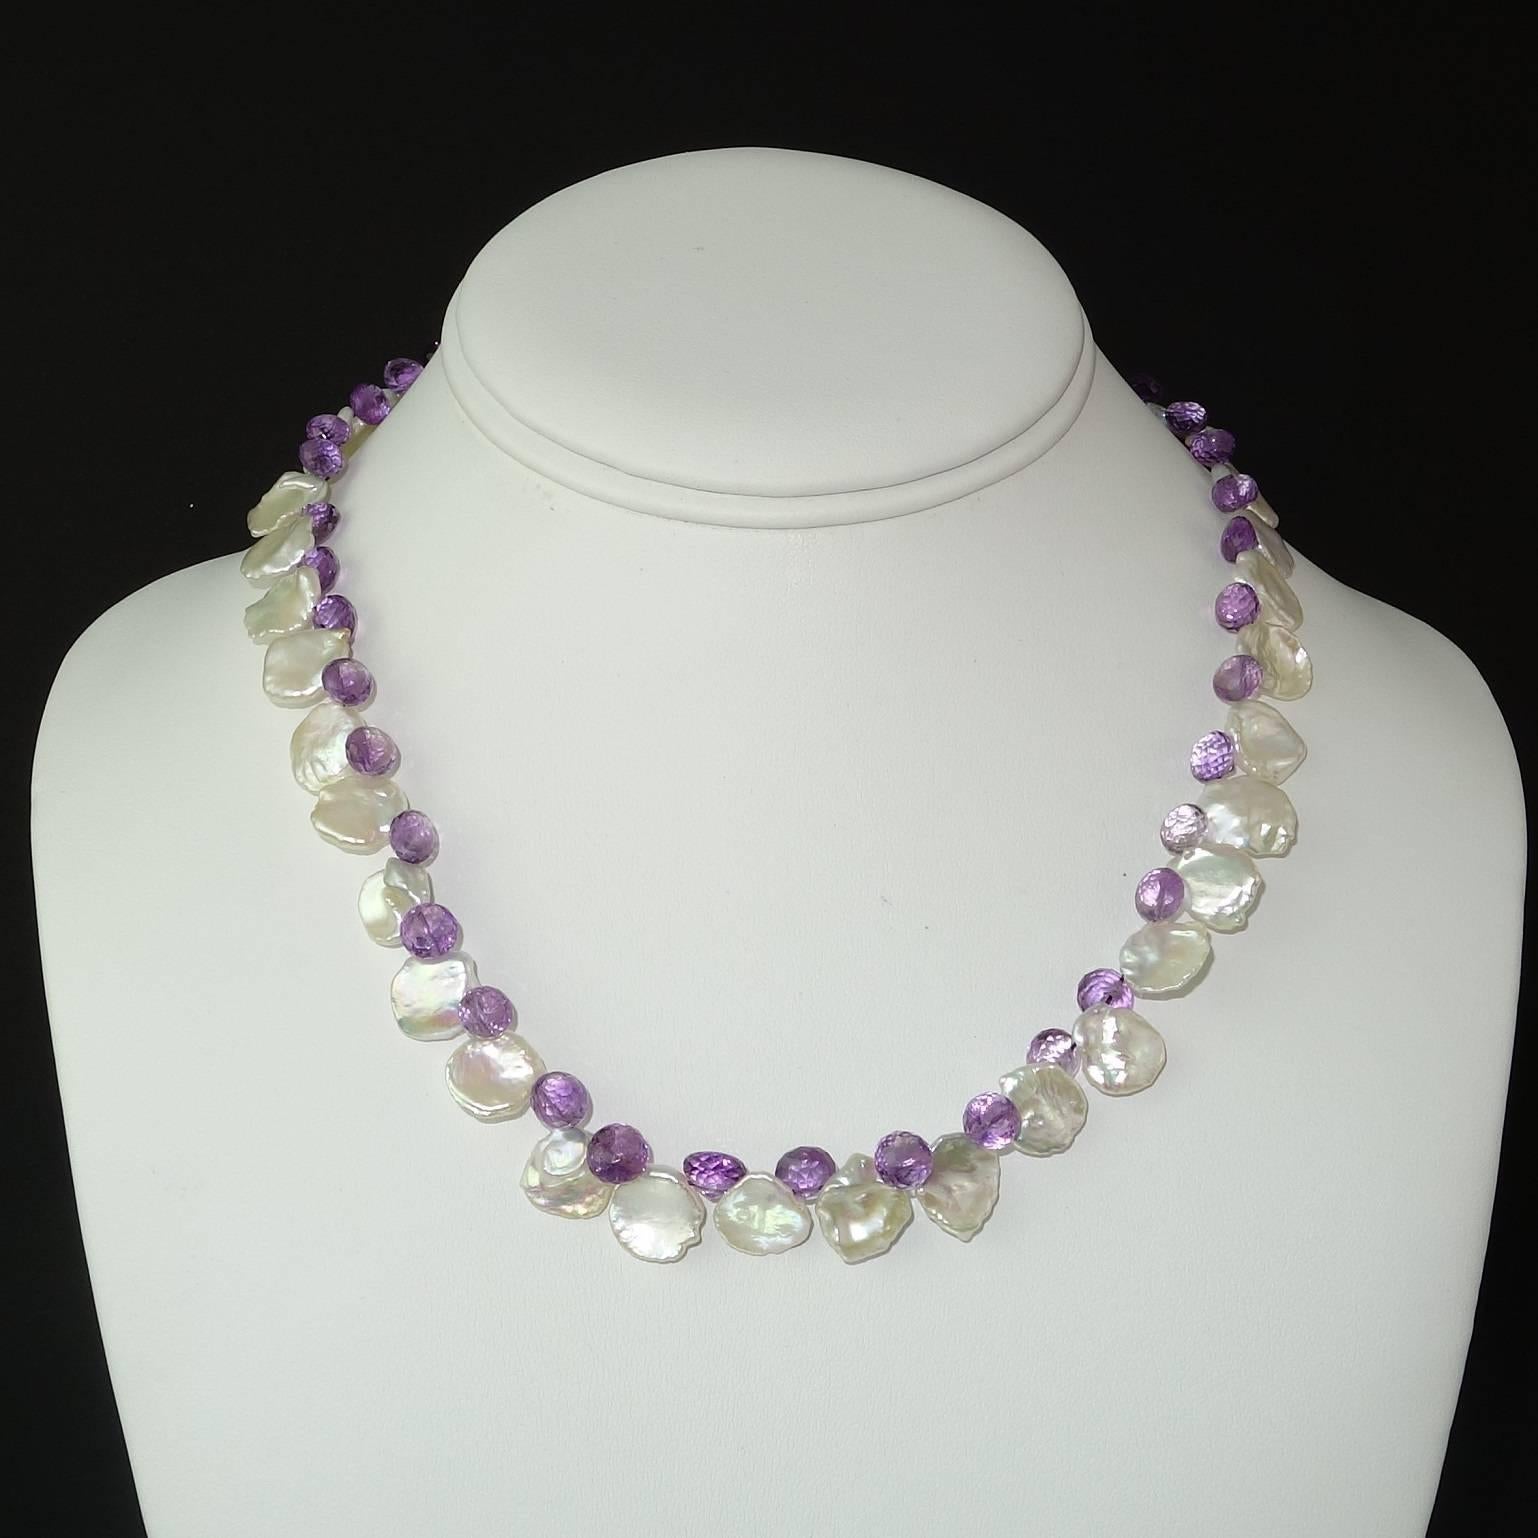 Gemjunky Iridescent White Keshi Pearl and Amethyst Briolette Necklace  3